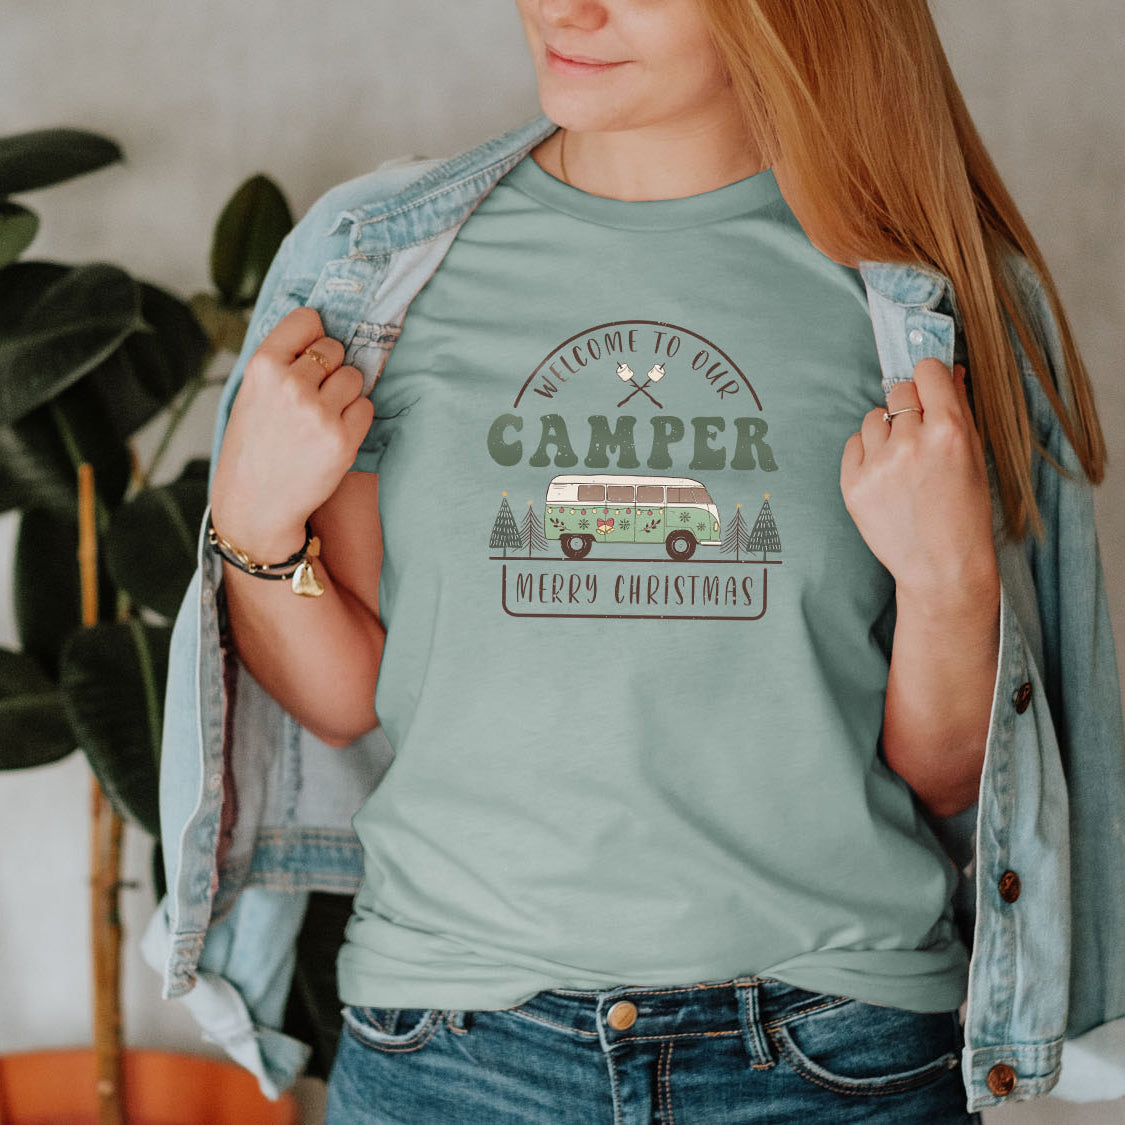 Welcome To Our Camper Van Merry Christmas T-shirt - Christmas Winter Retro Vintage Design Printed Tee Shirt